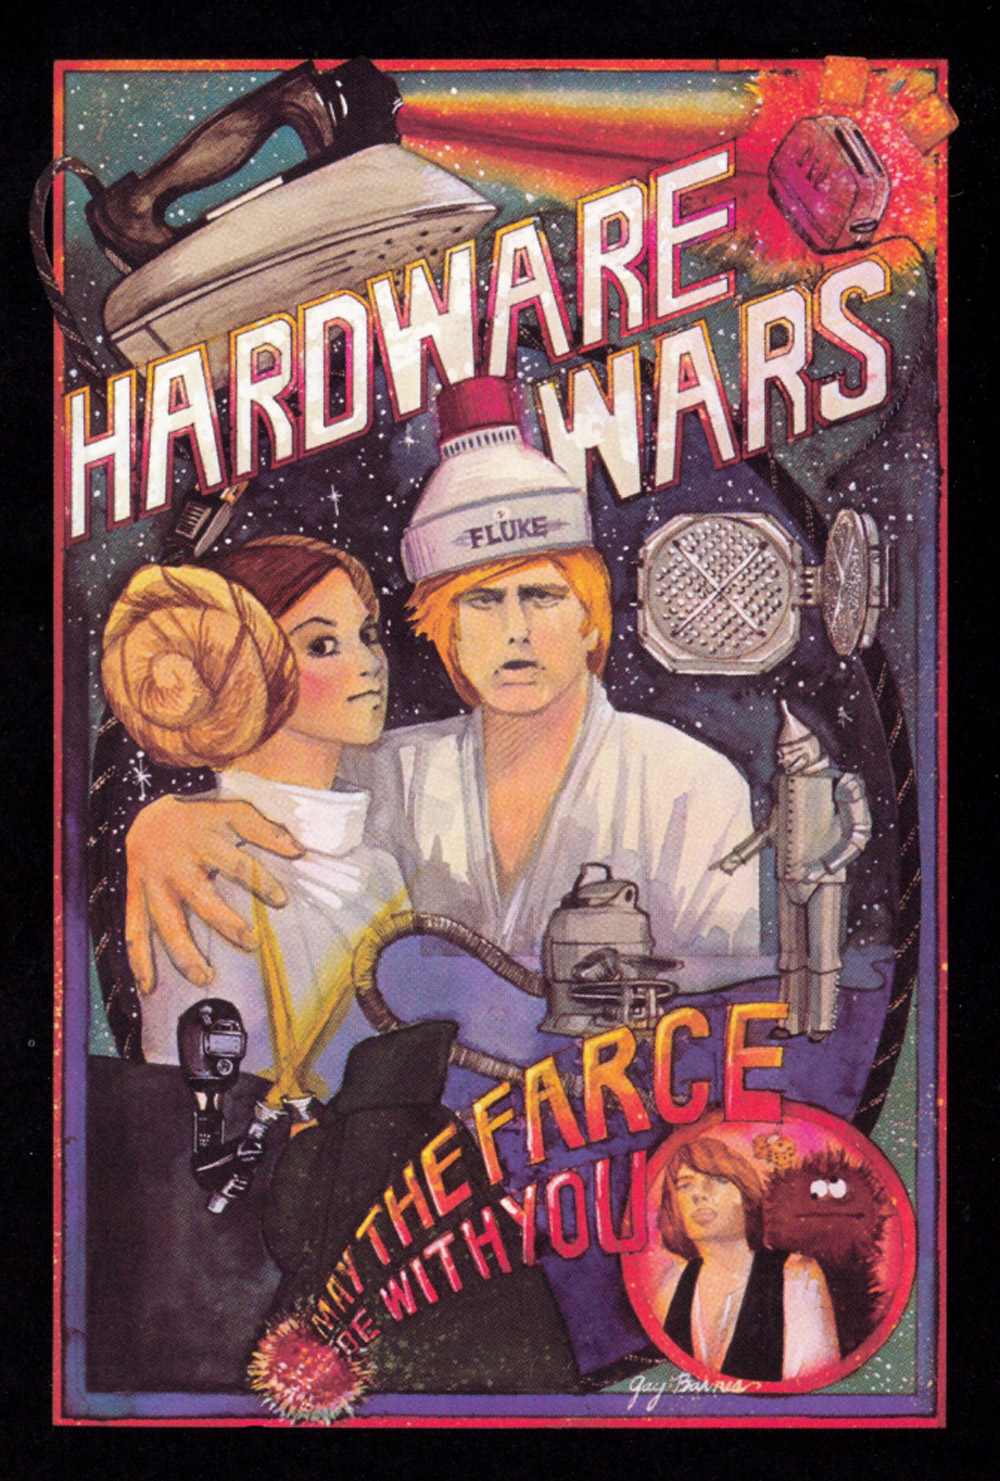 Collector's Edition cover art for 'Hardware Wars' (1978), Pyramid Films